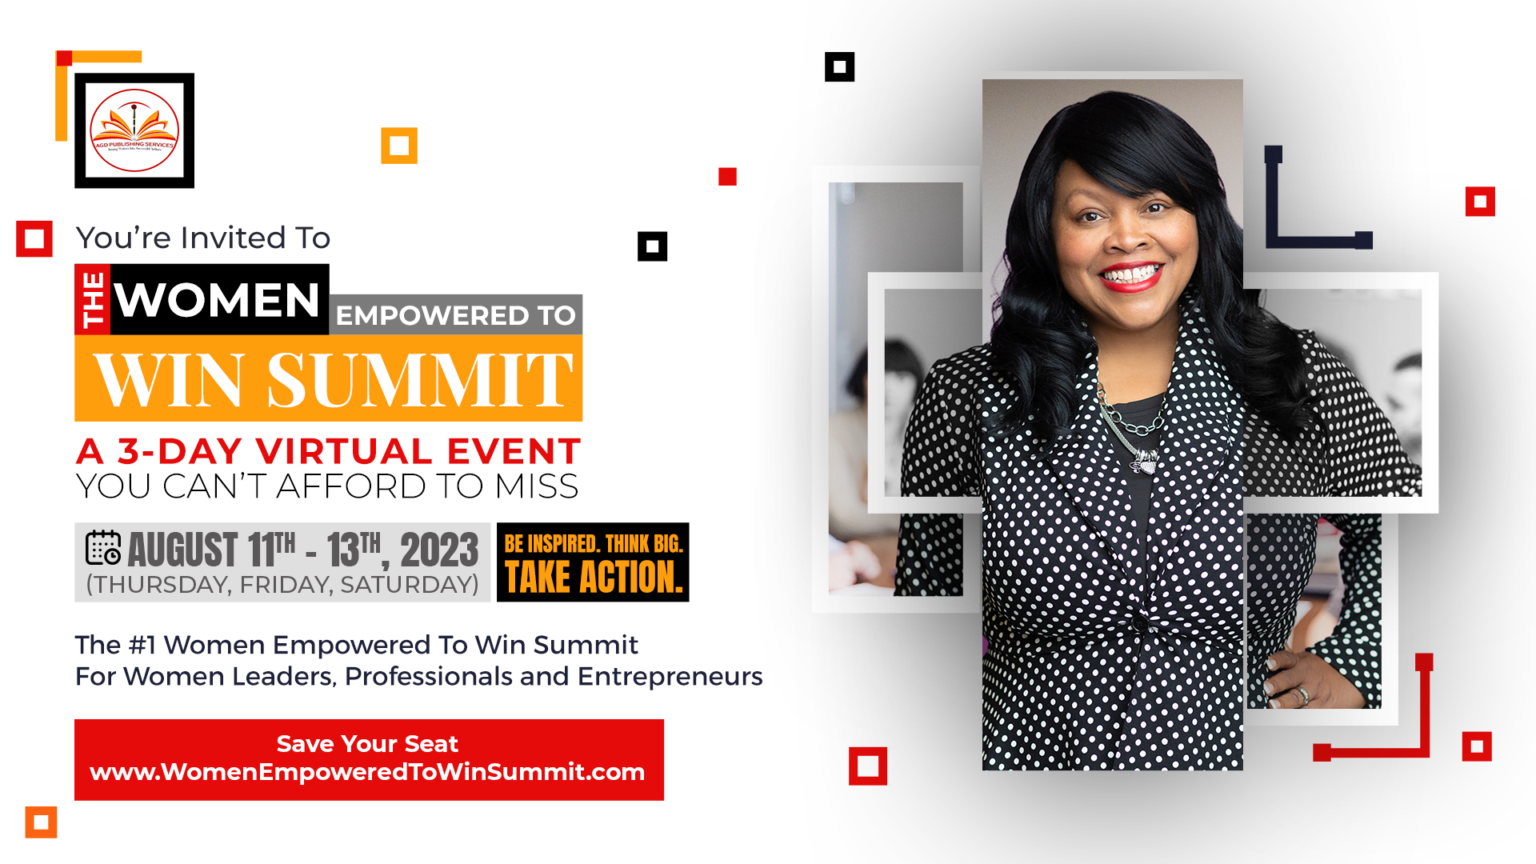 Promo-Images-for-Social-Media-Women-Empowered-To-Win-Summit-1920×1080-01-1536×864